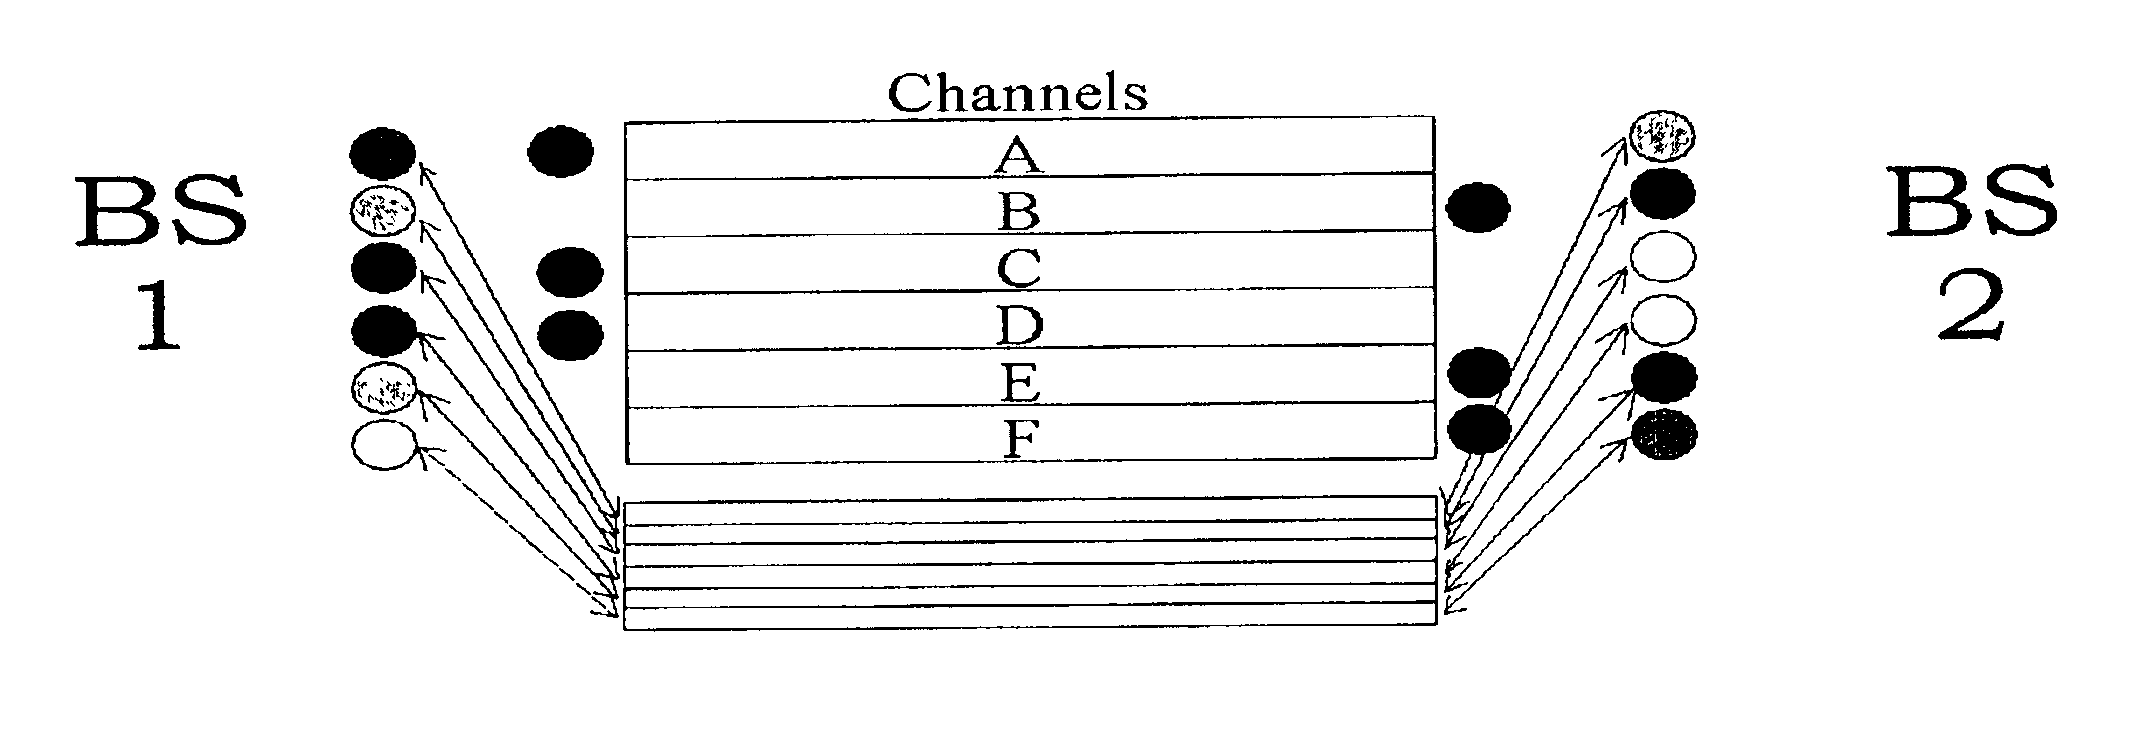 Allocation of channels to radio transceivers